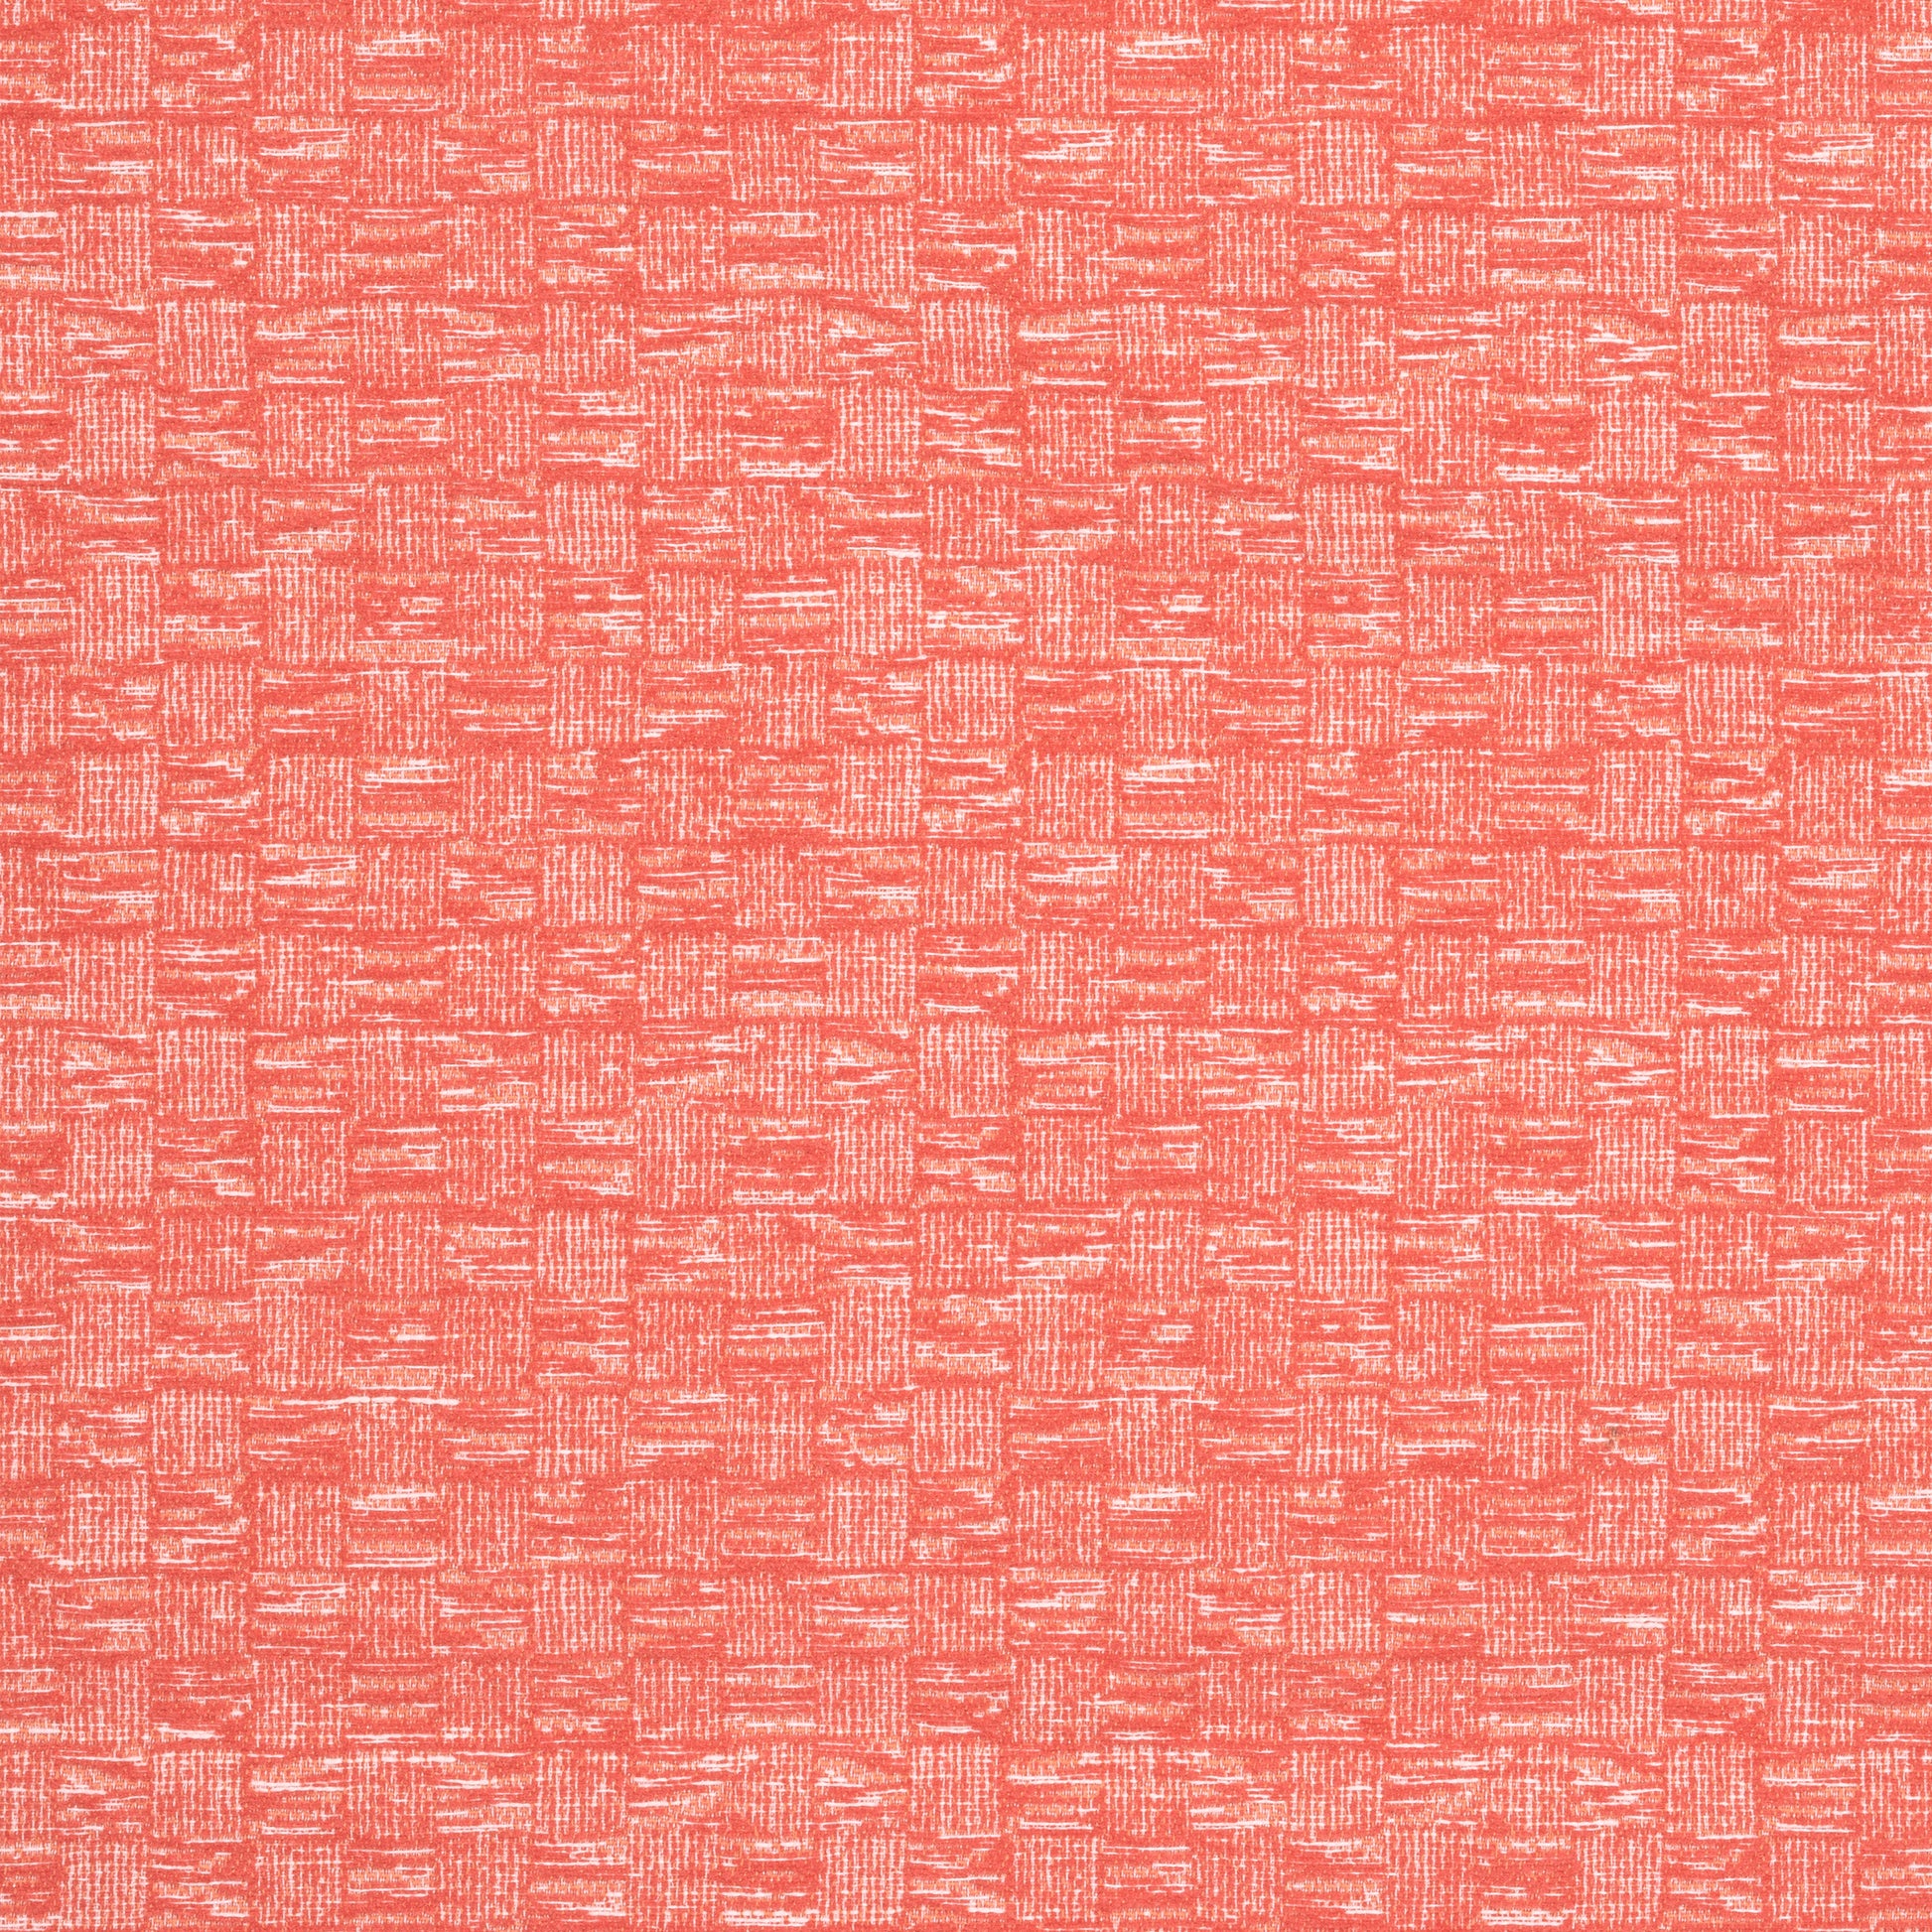 Purchase Thibaut Fabric Product# W8516 pattern name Cestino color Coral